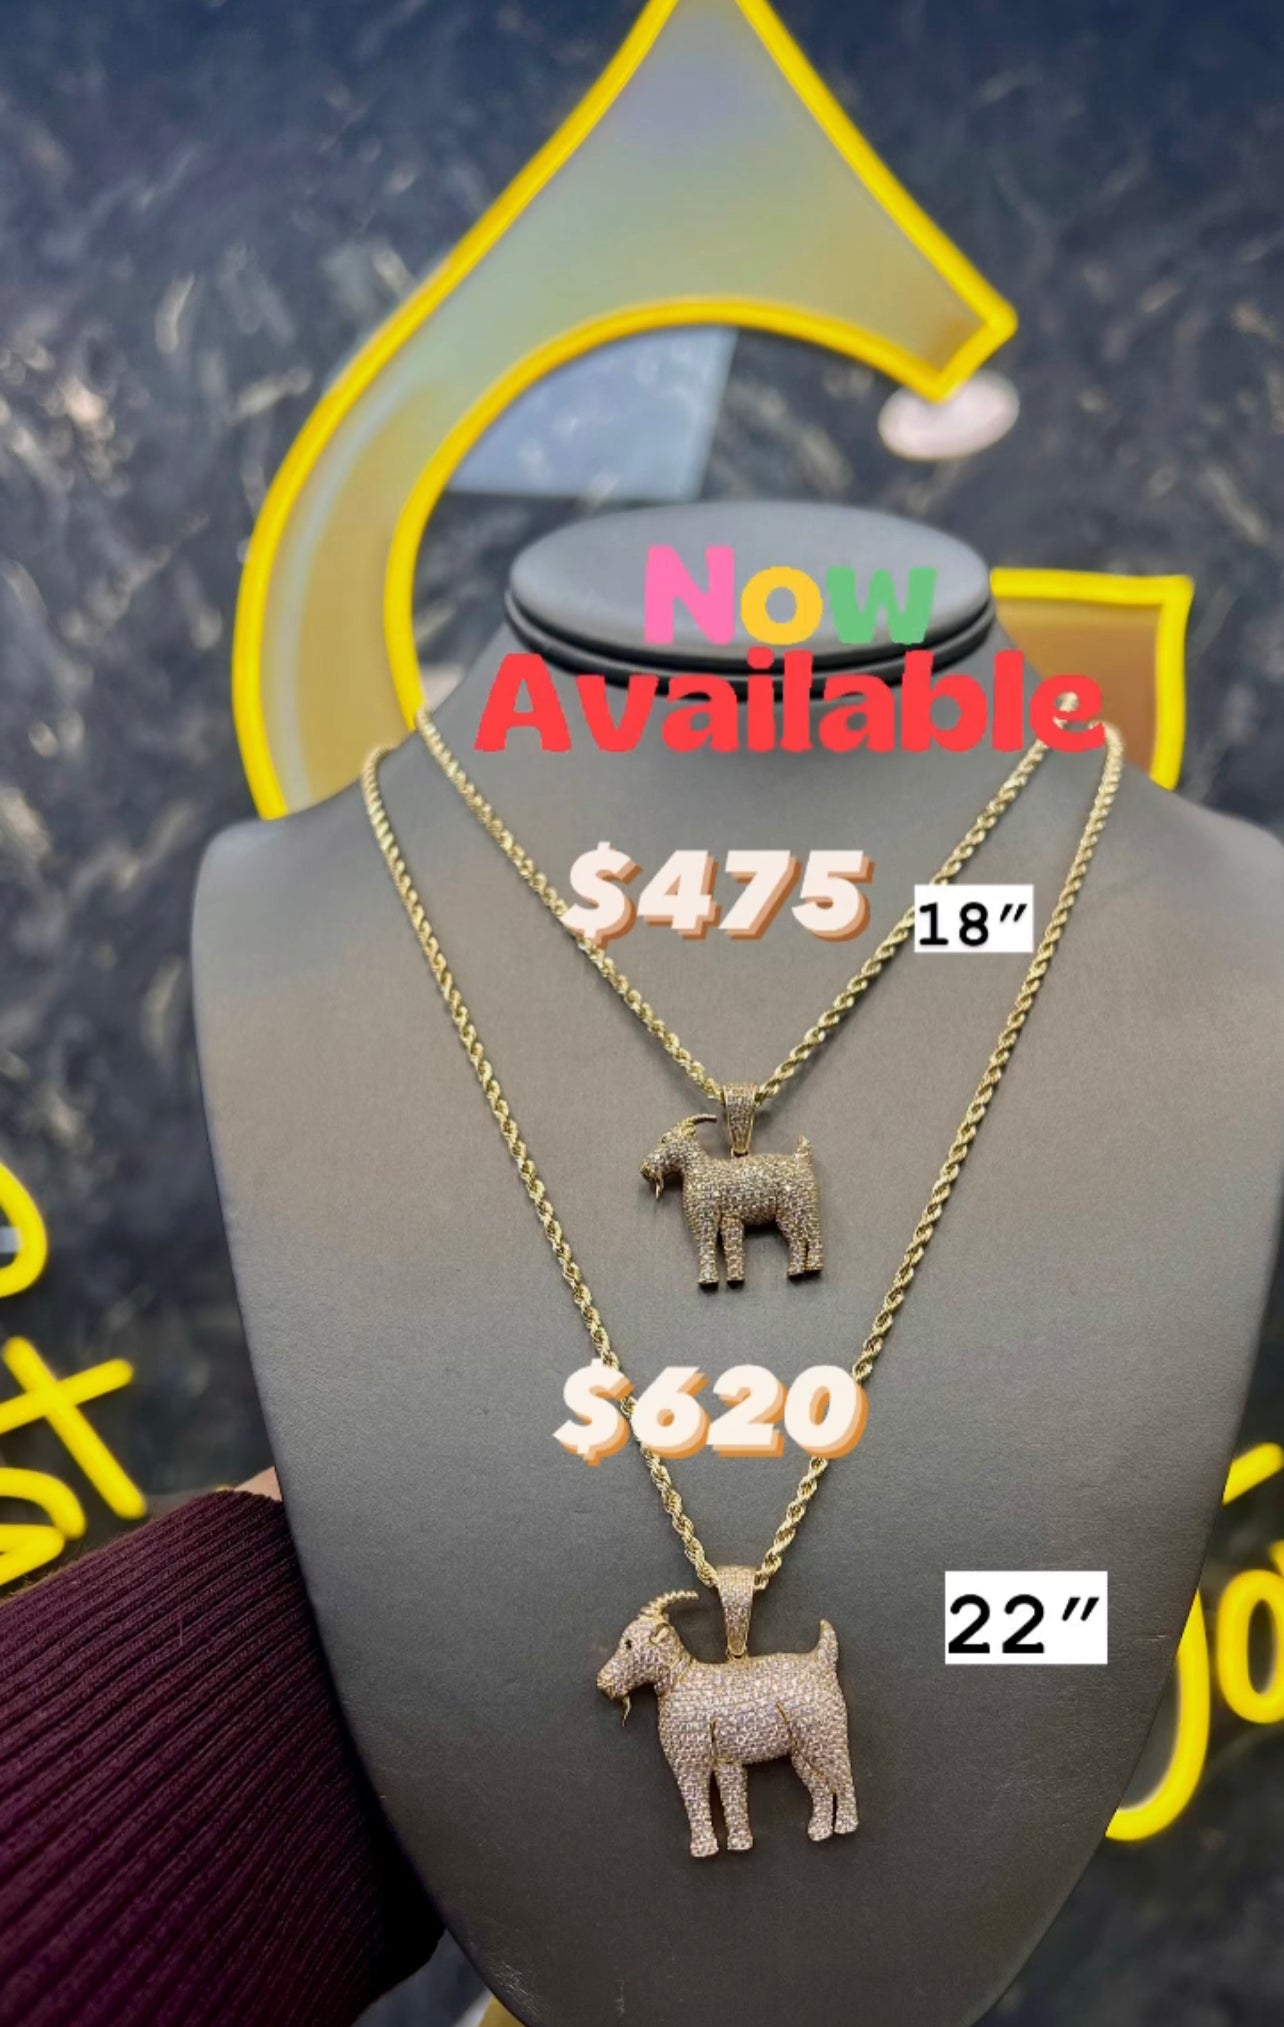 New🔥 Instagram Sale 14K Goat 🐐 With rope Chain By GDO